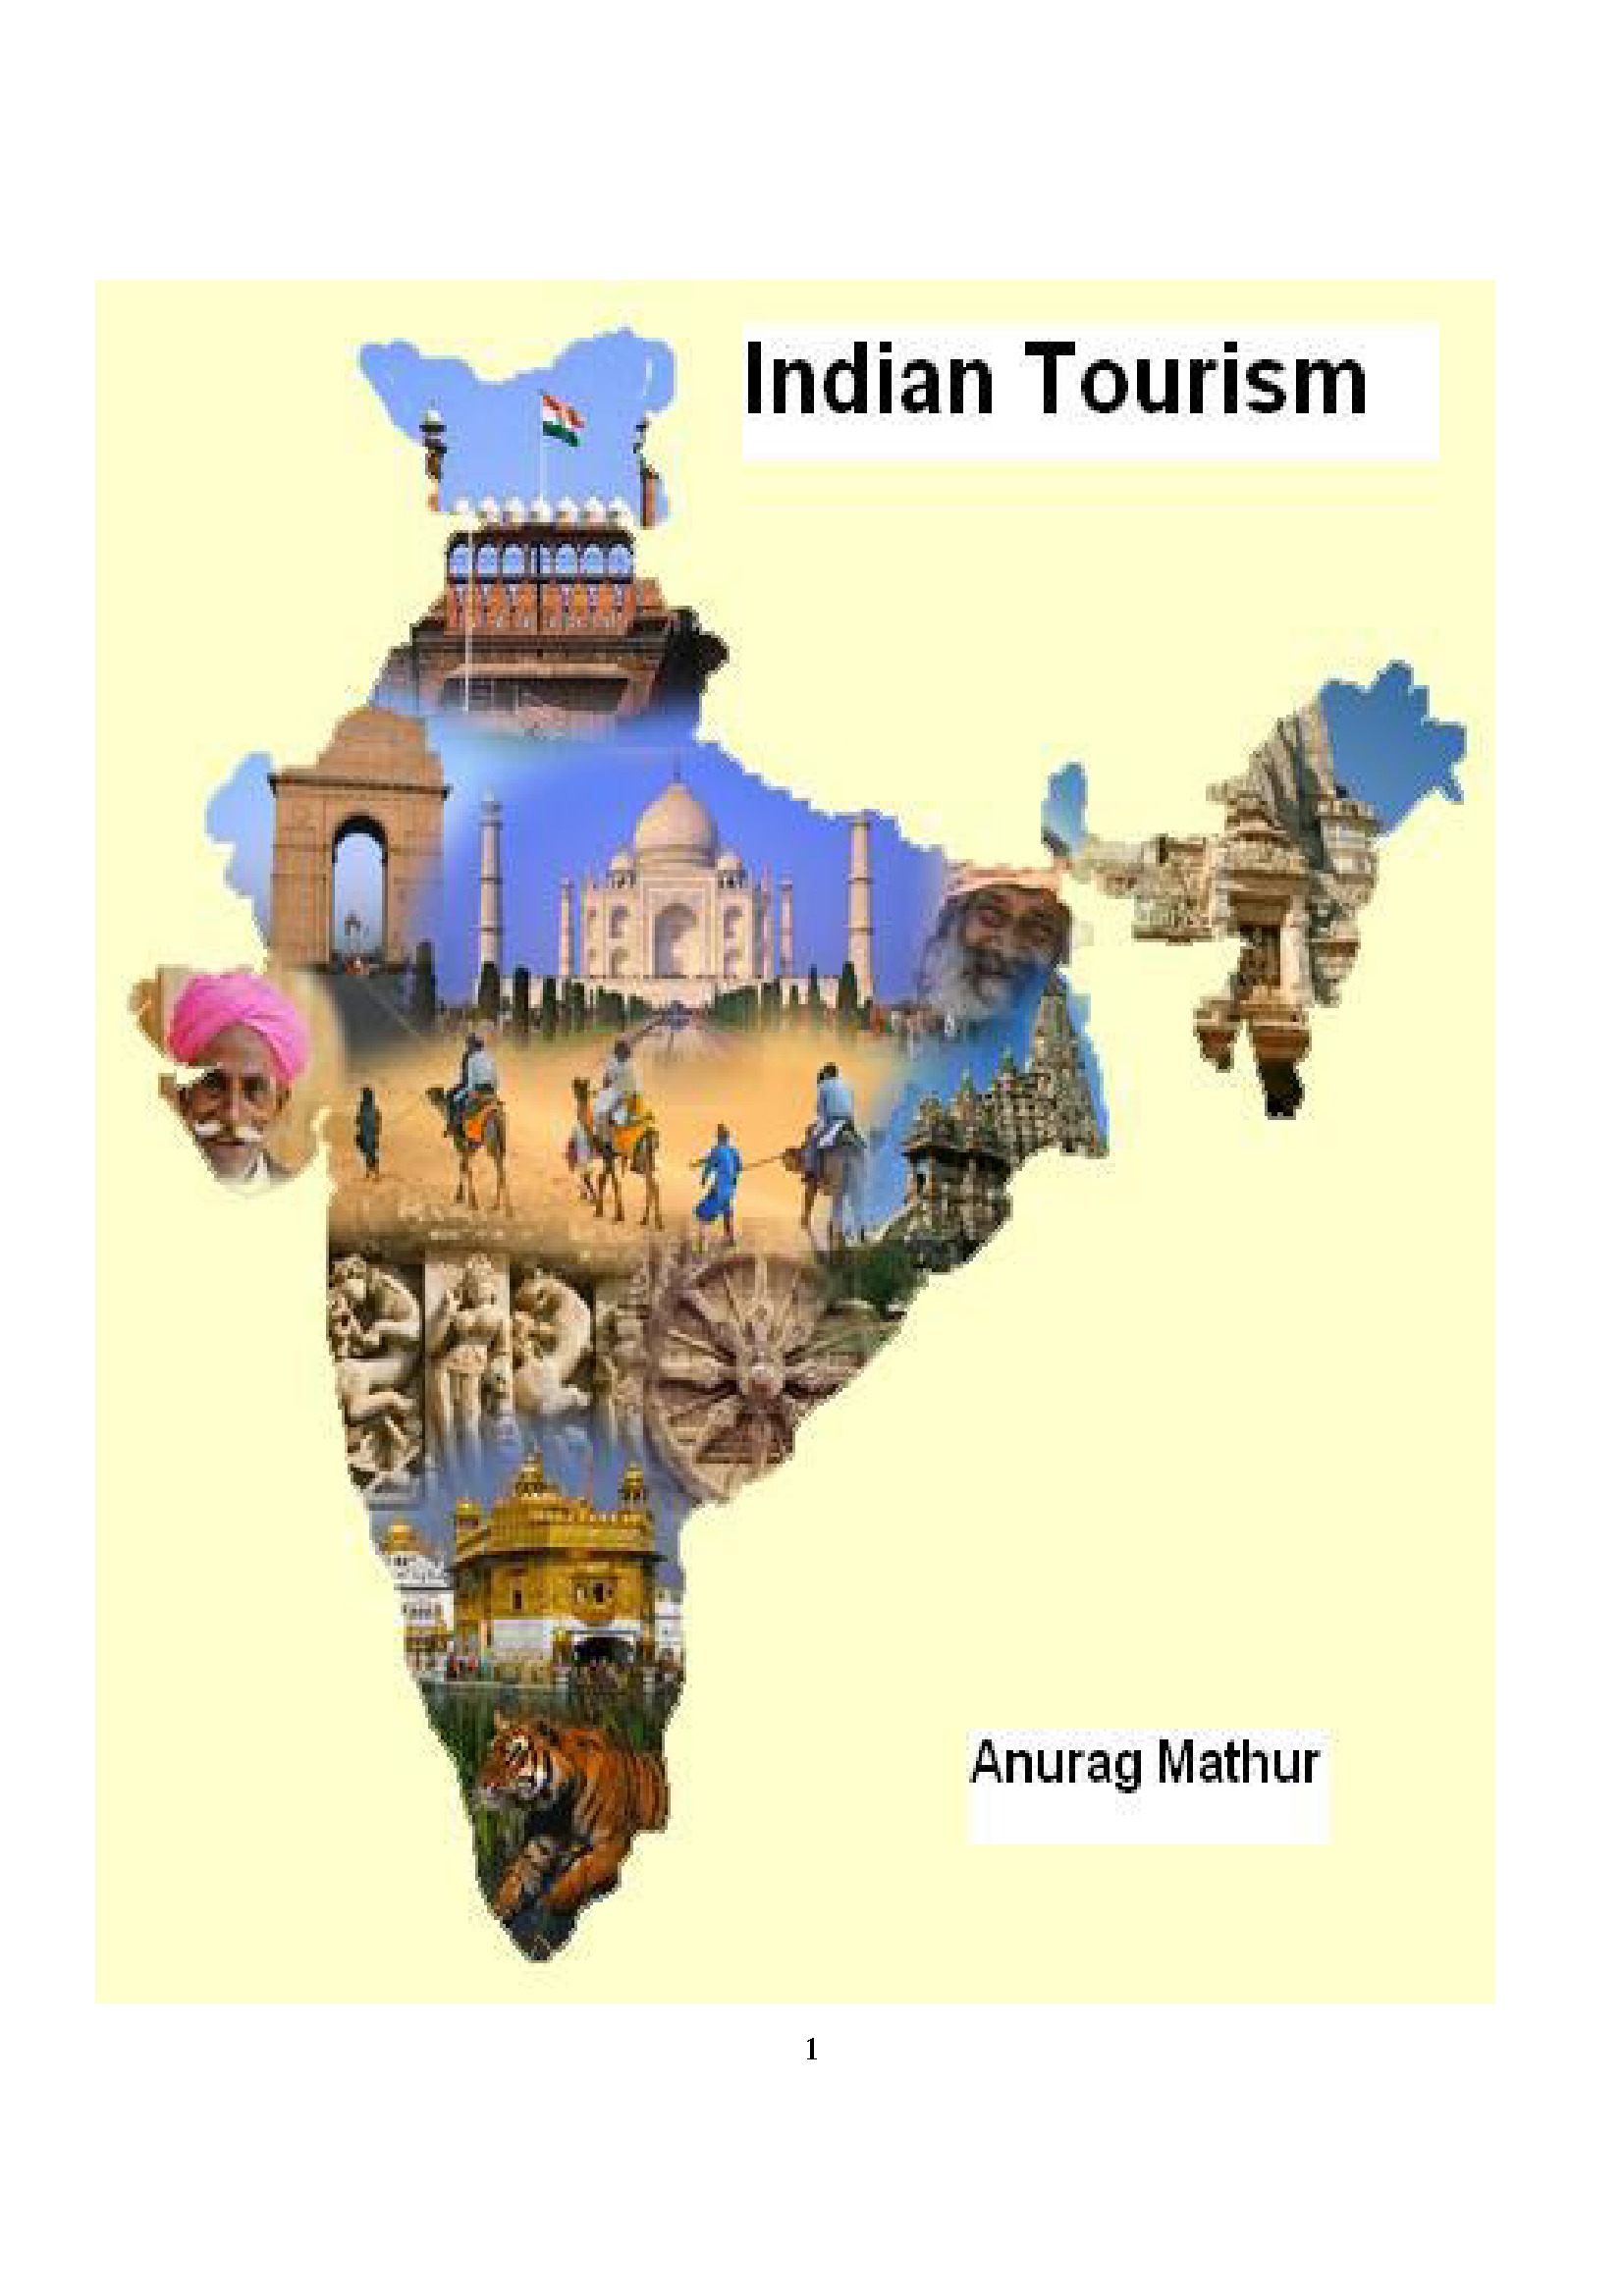 phd thesis on tourism in india pdf